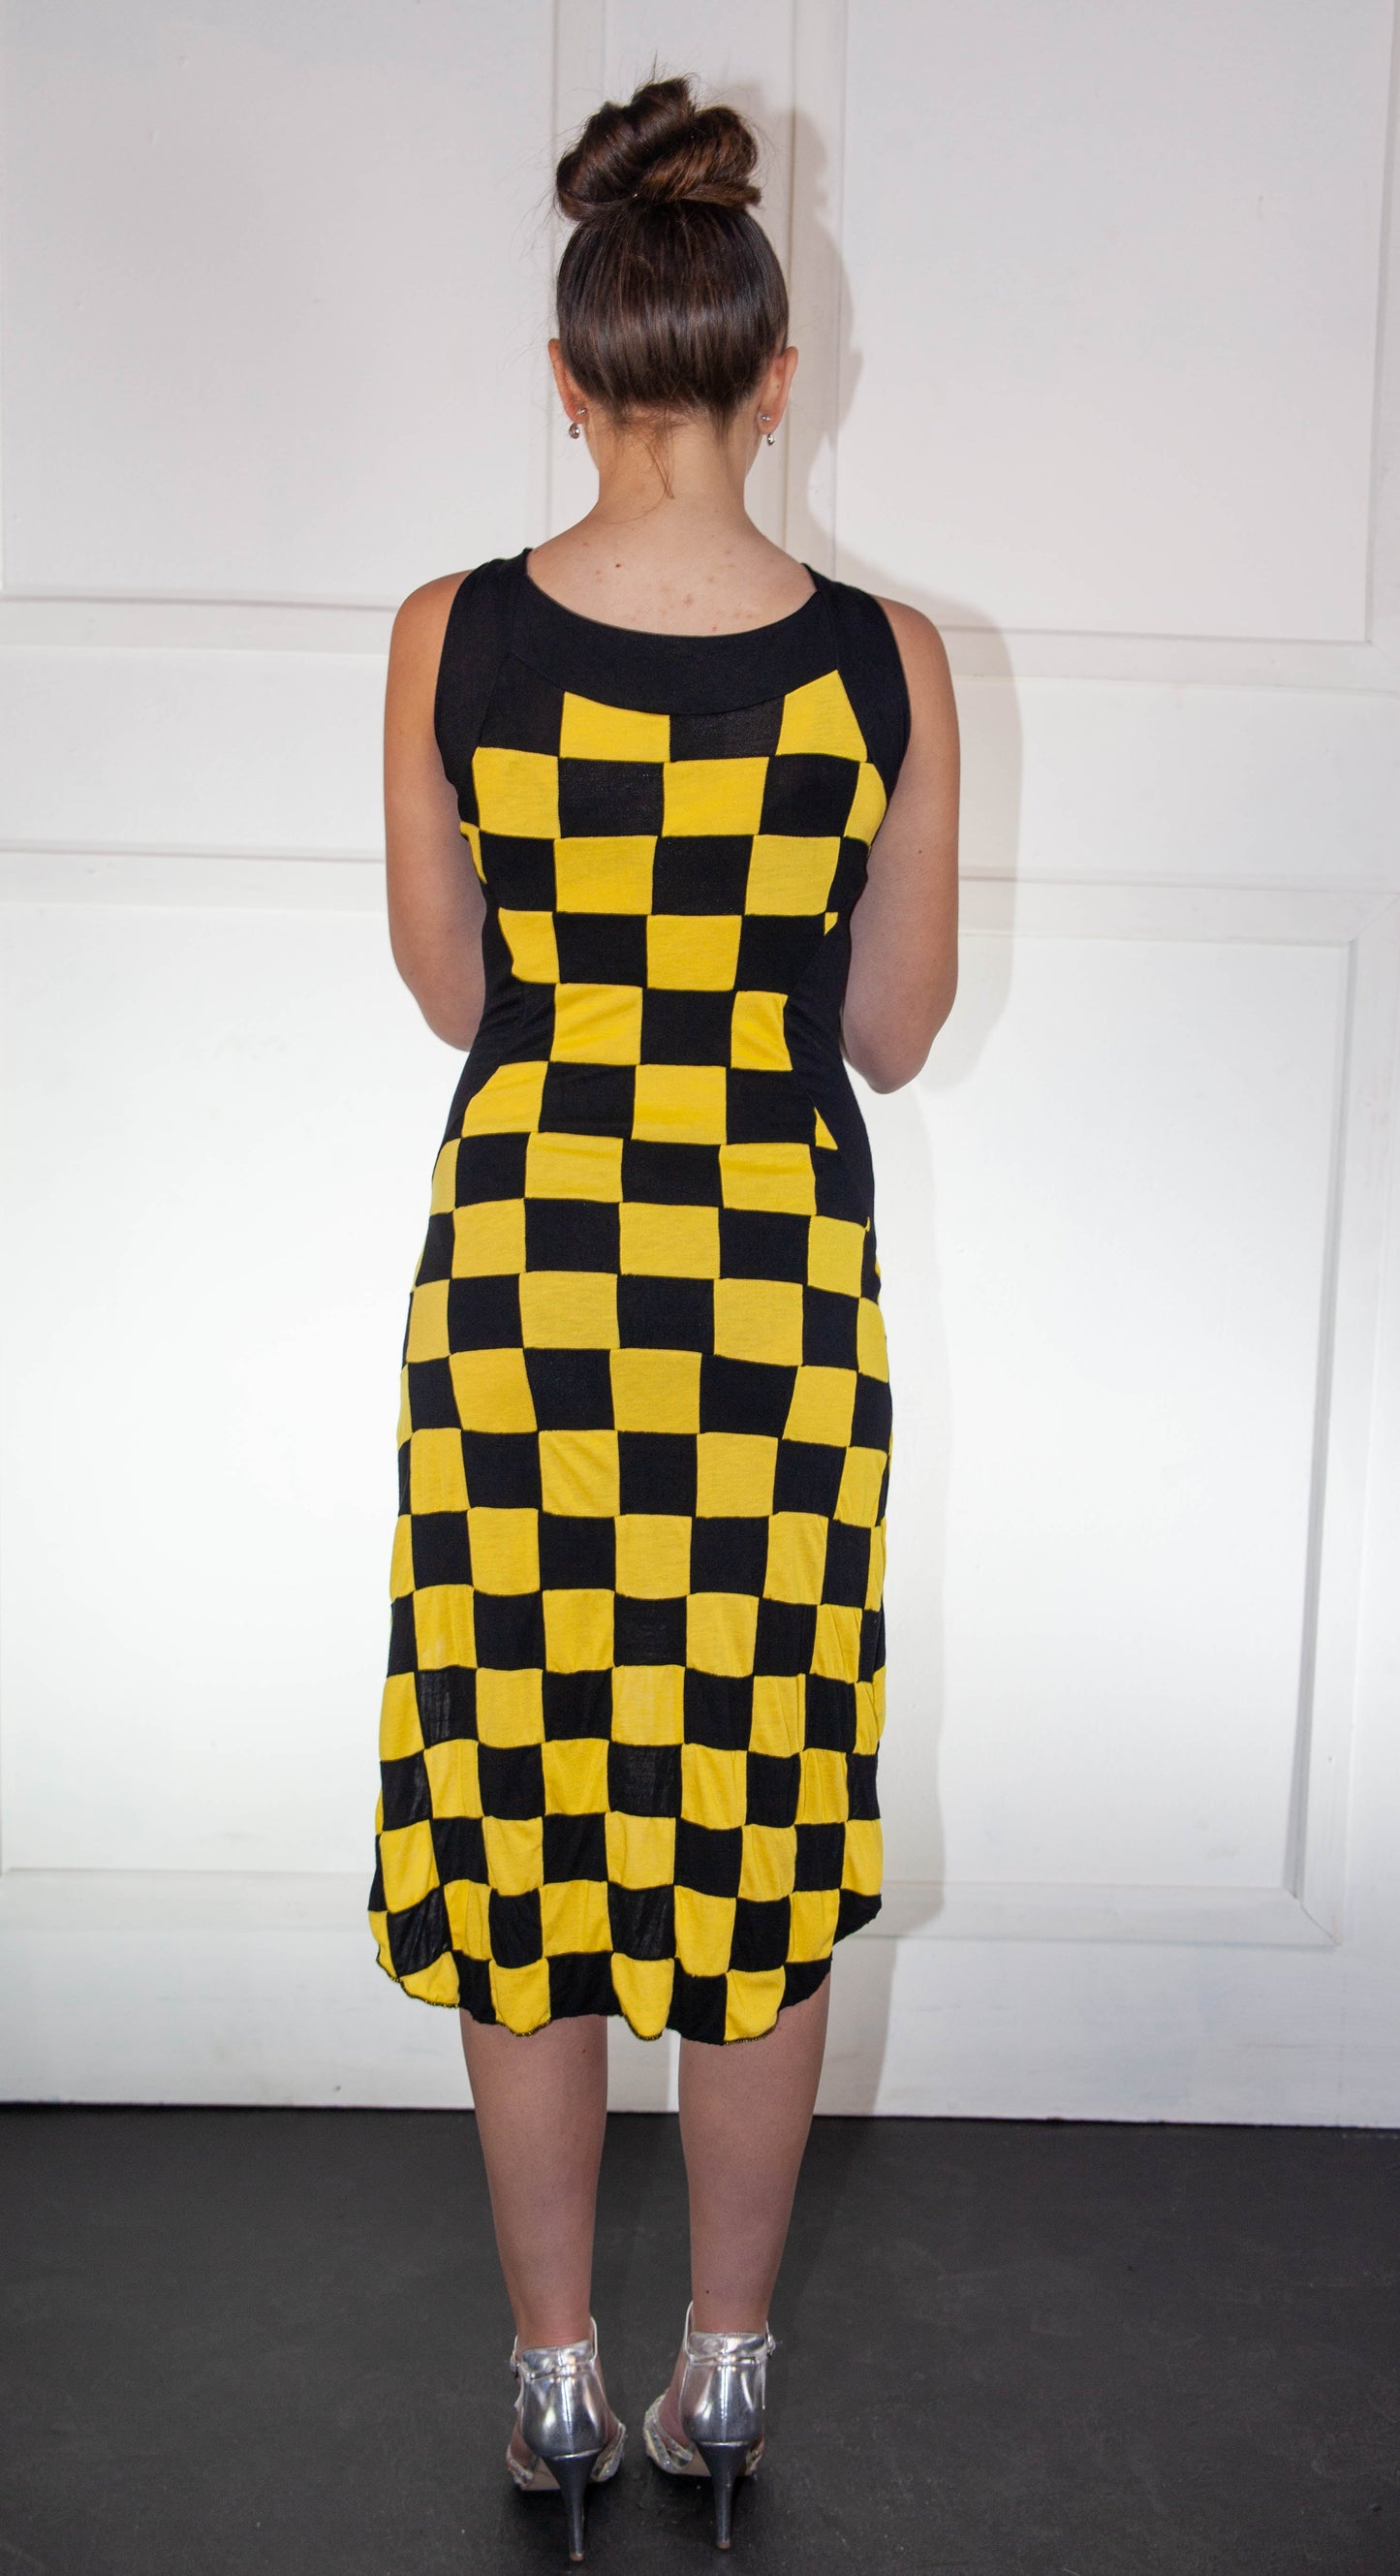 Summer Dress - High Low Checkered Yellow and Black